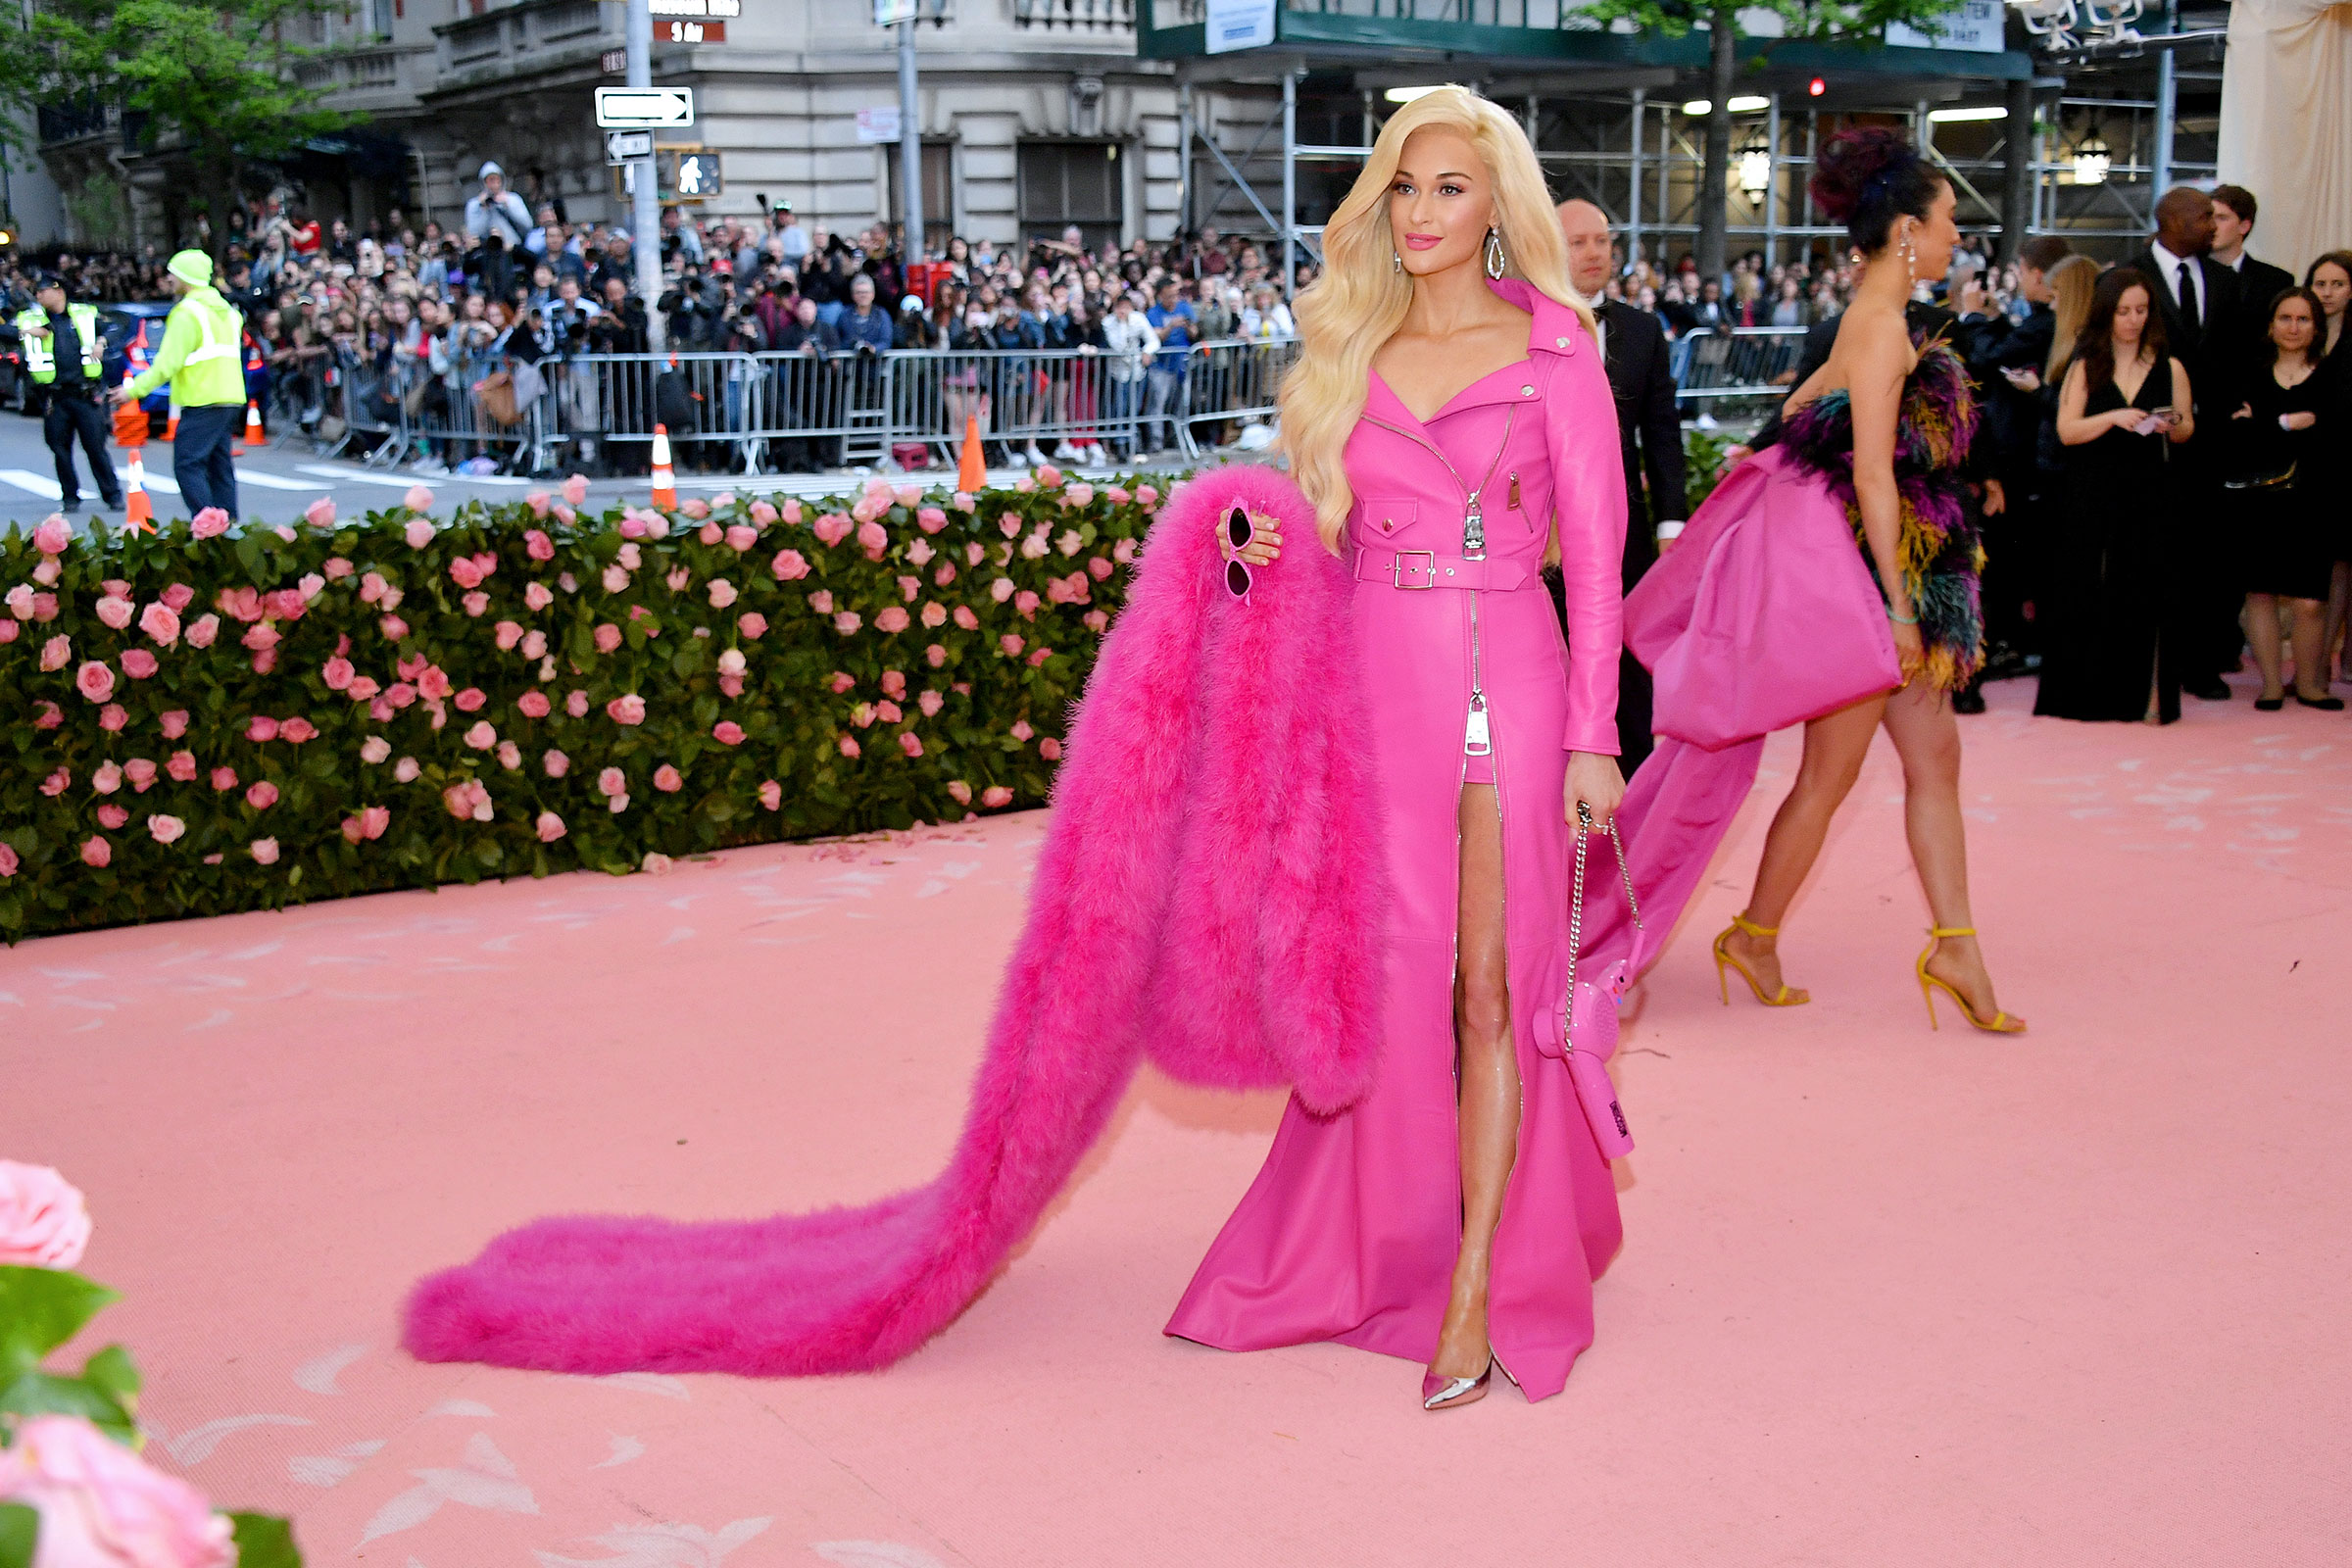 Singer Kacey Musgraves stands on the met gala carpet getting her photo taken wearing a full hot pink outfit that makes her look like a barbie doll